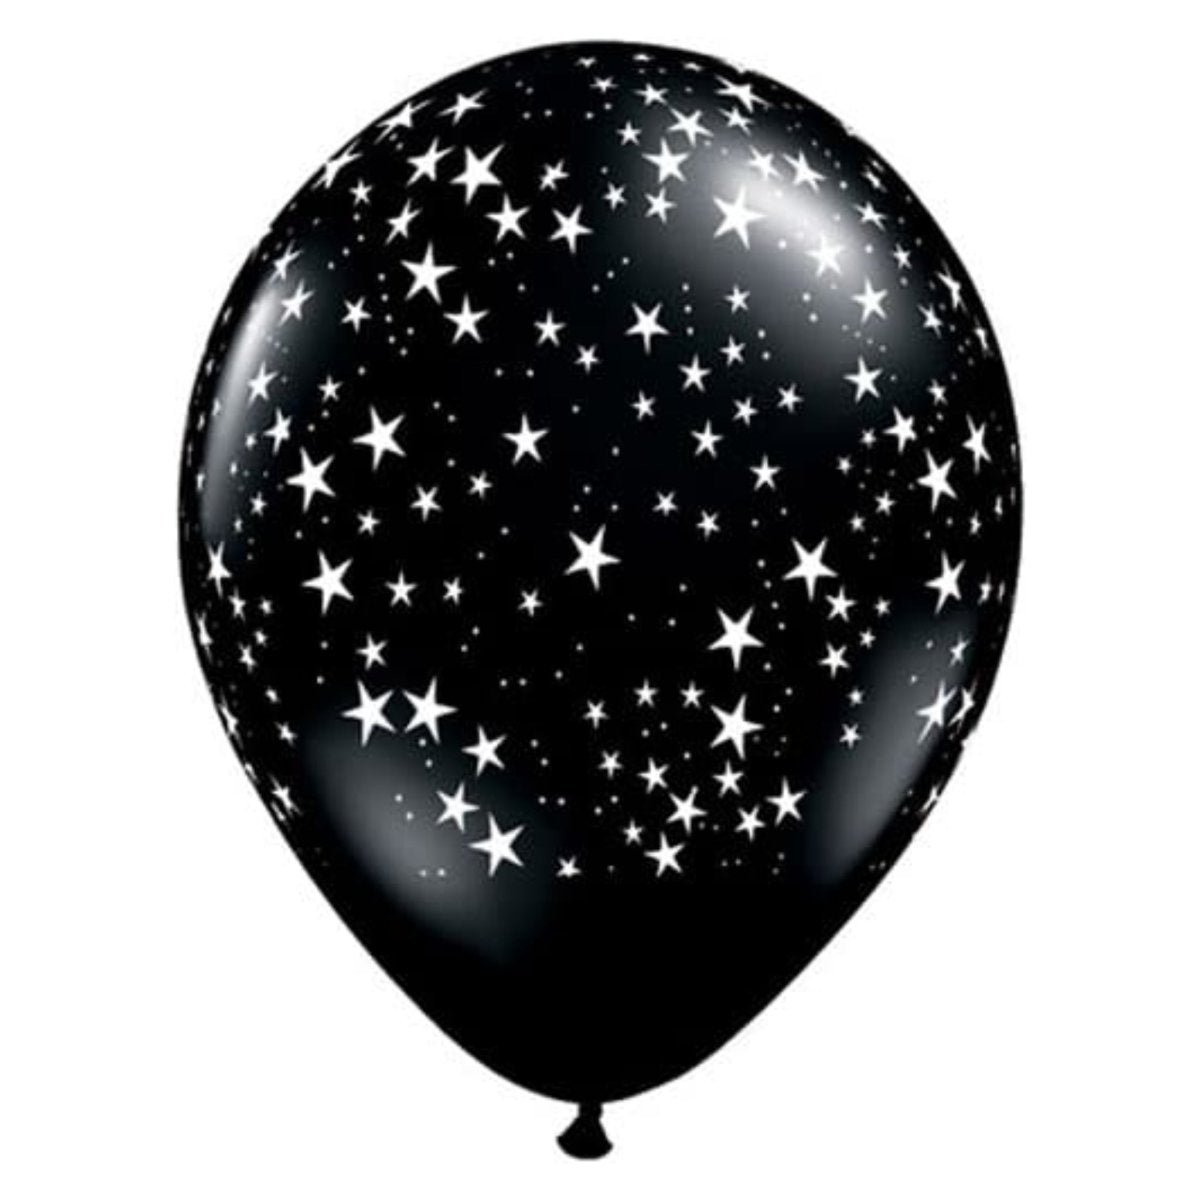 Black Balloon With Stars - 10 Pack - Kids Party Craft